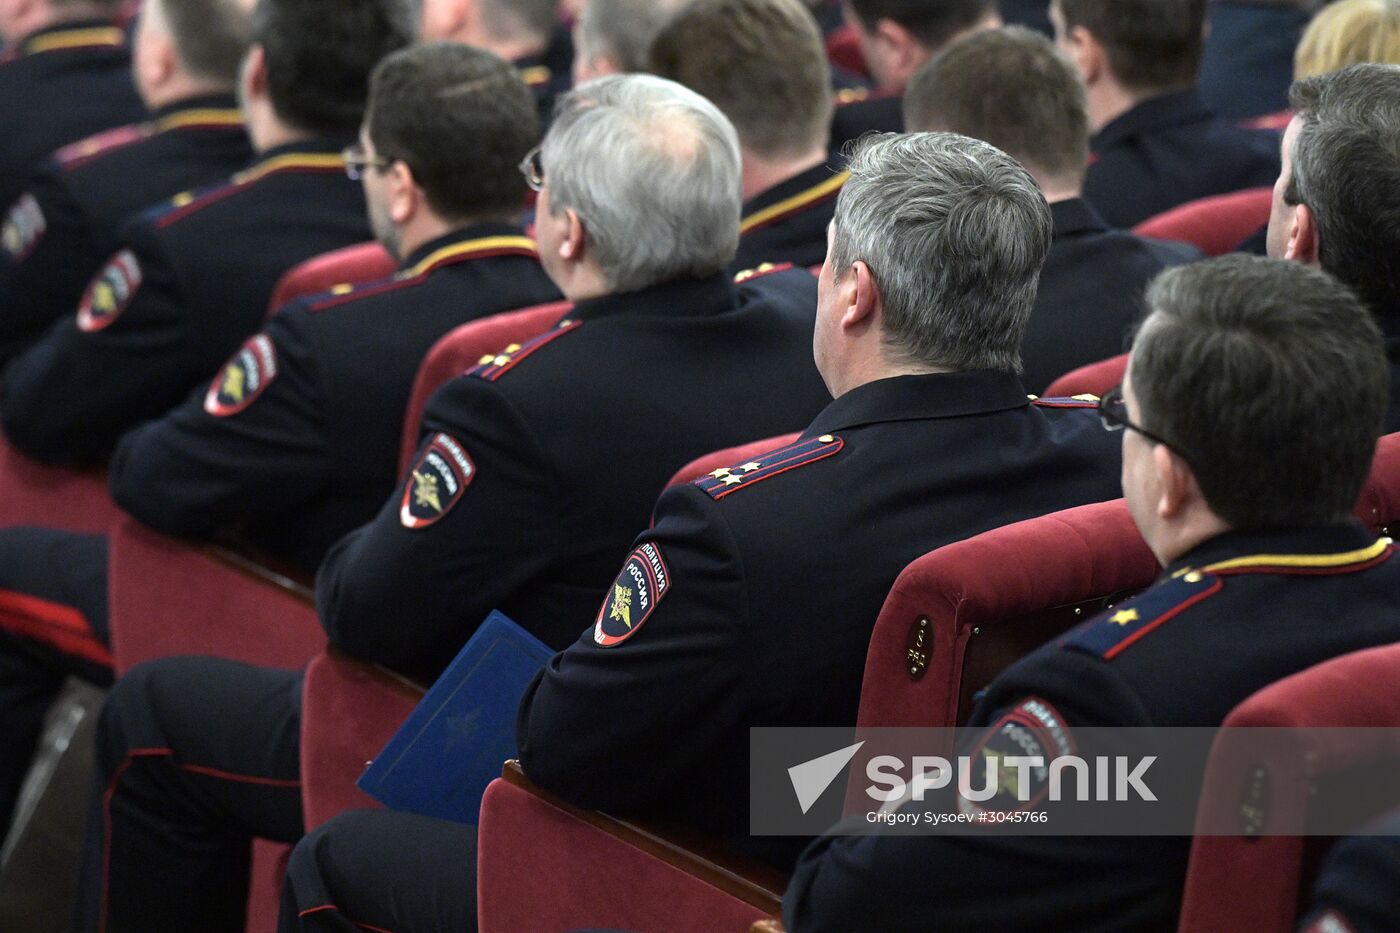 Meeting of Russian Interior Ministry Board